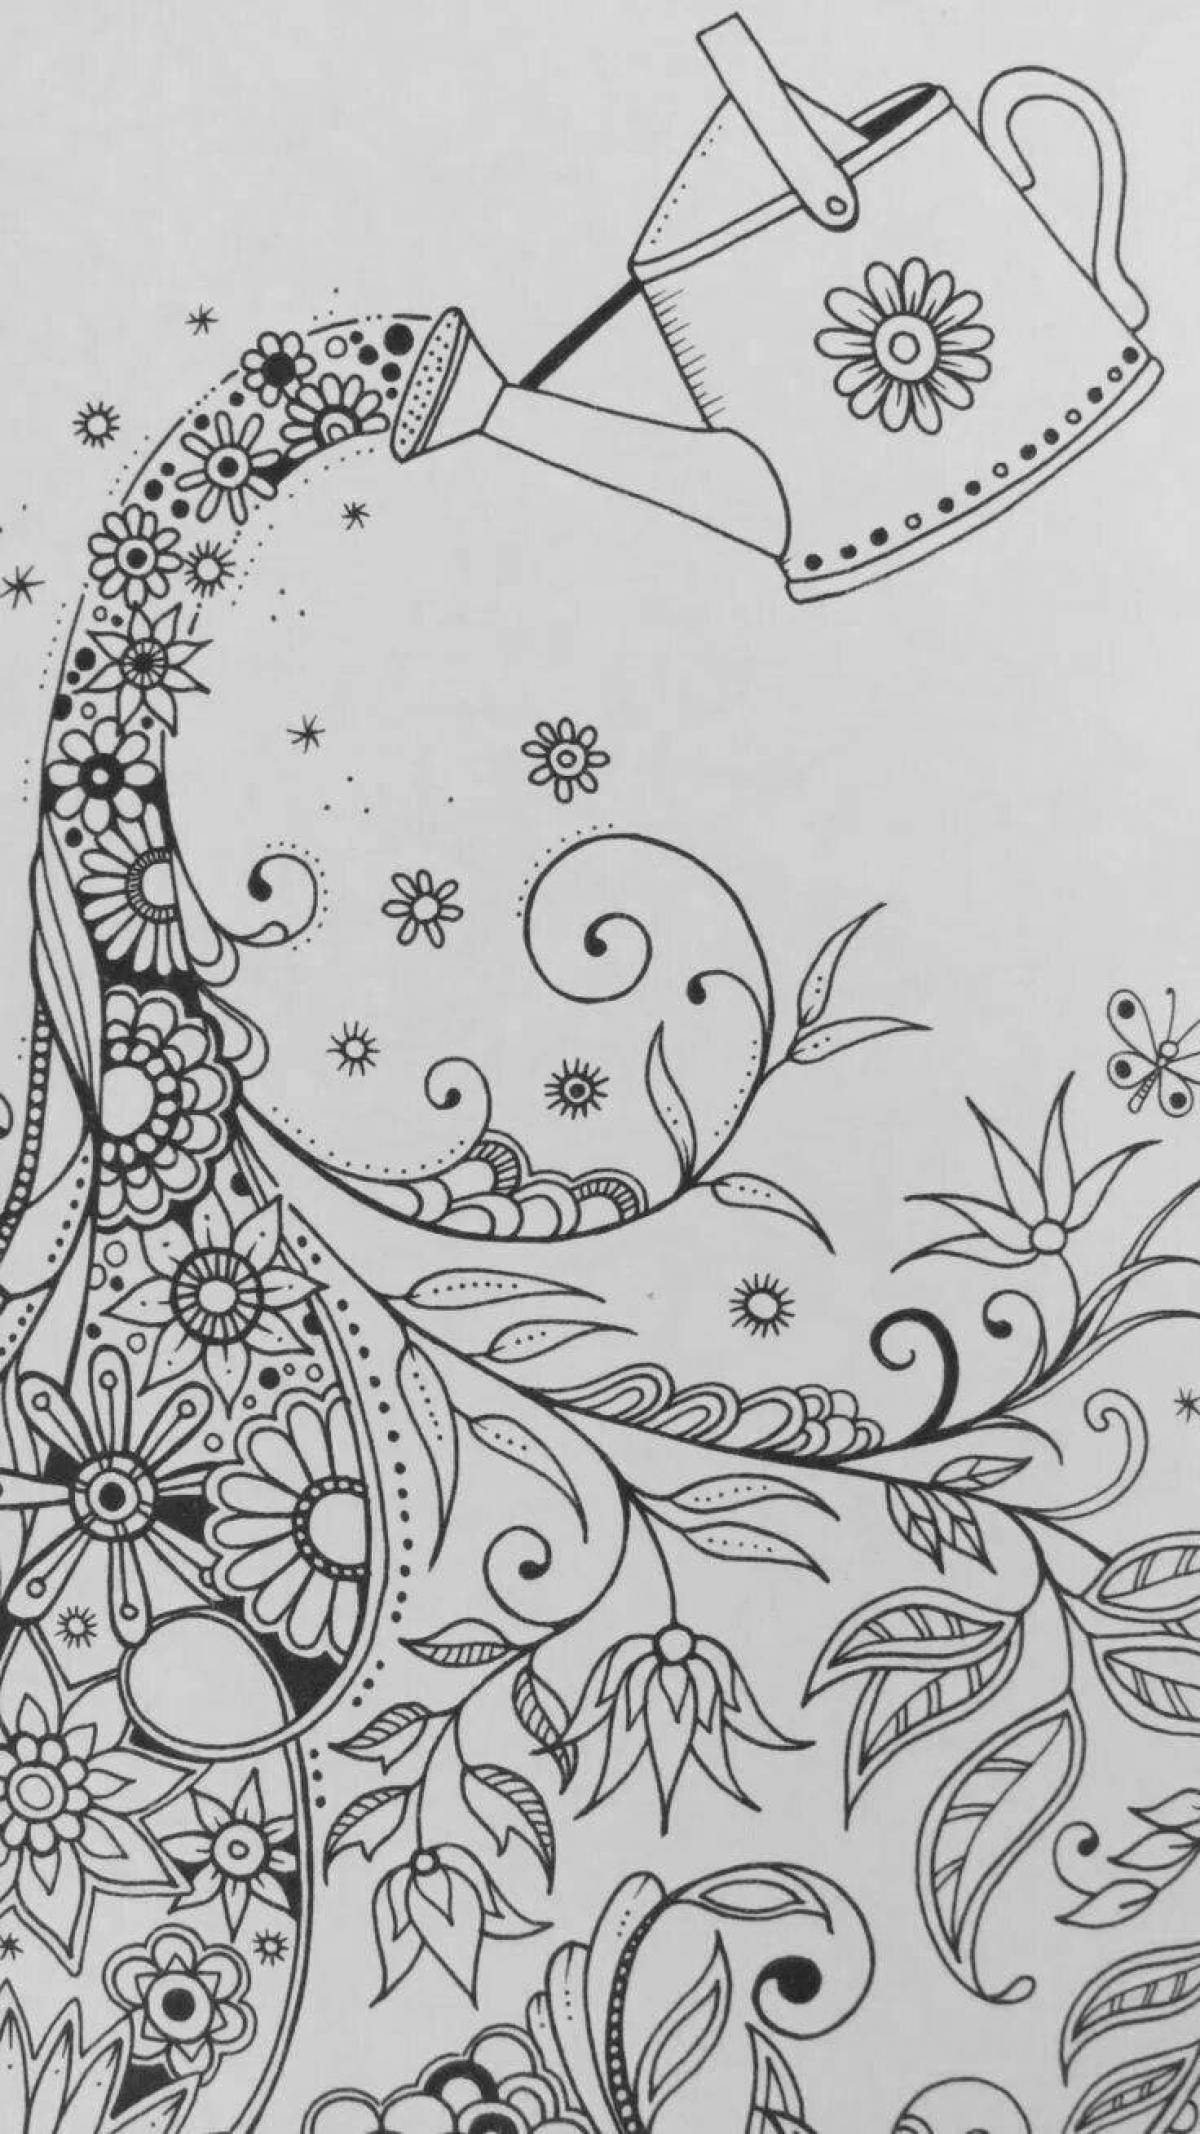 Soothing spring anti-stress coloring book